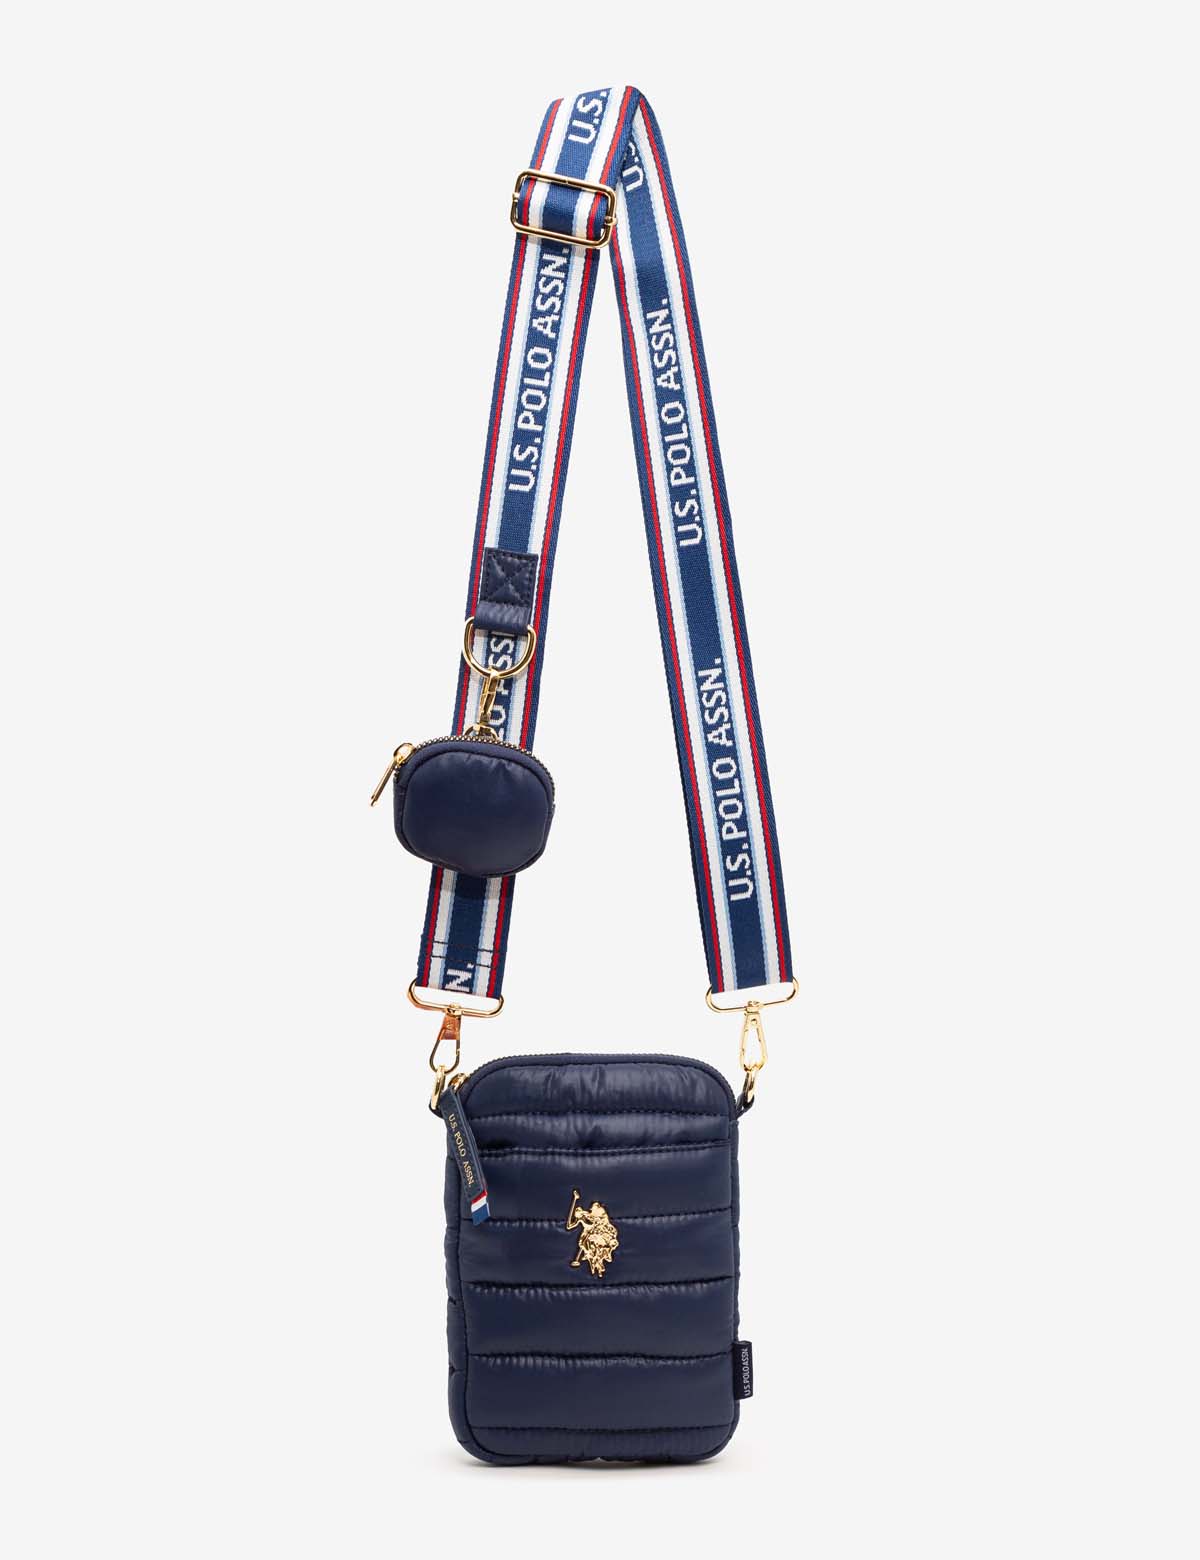 QUILTED PHONE CROSSBODY WITH ZIPPER POUCH U.S. POLO ASSN.